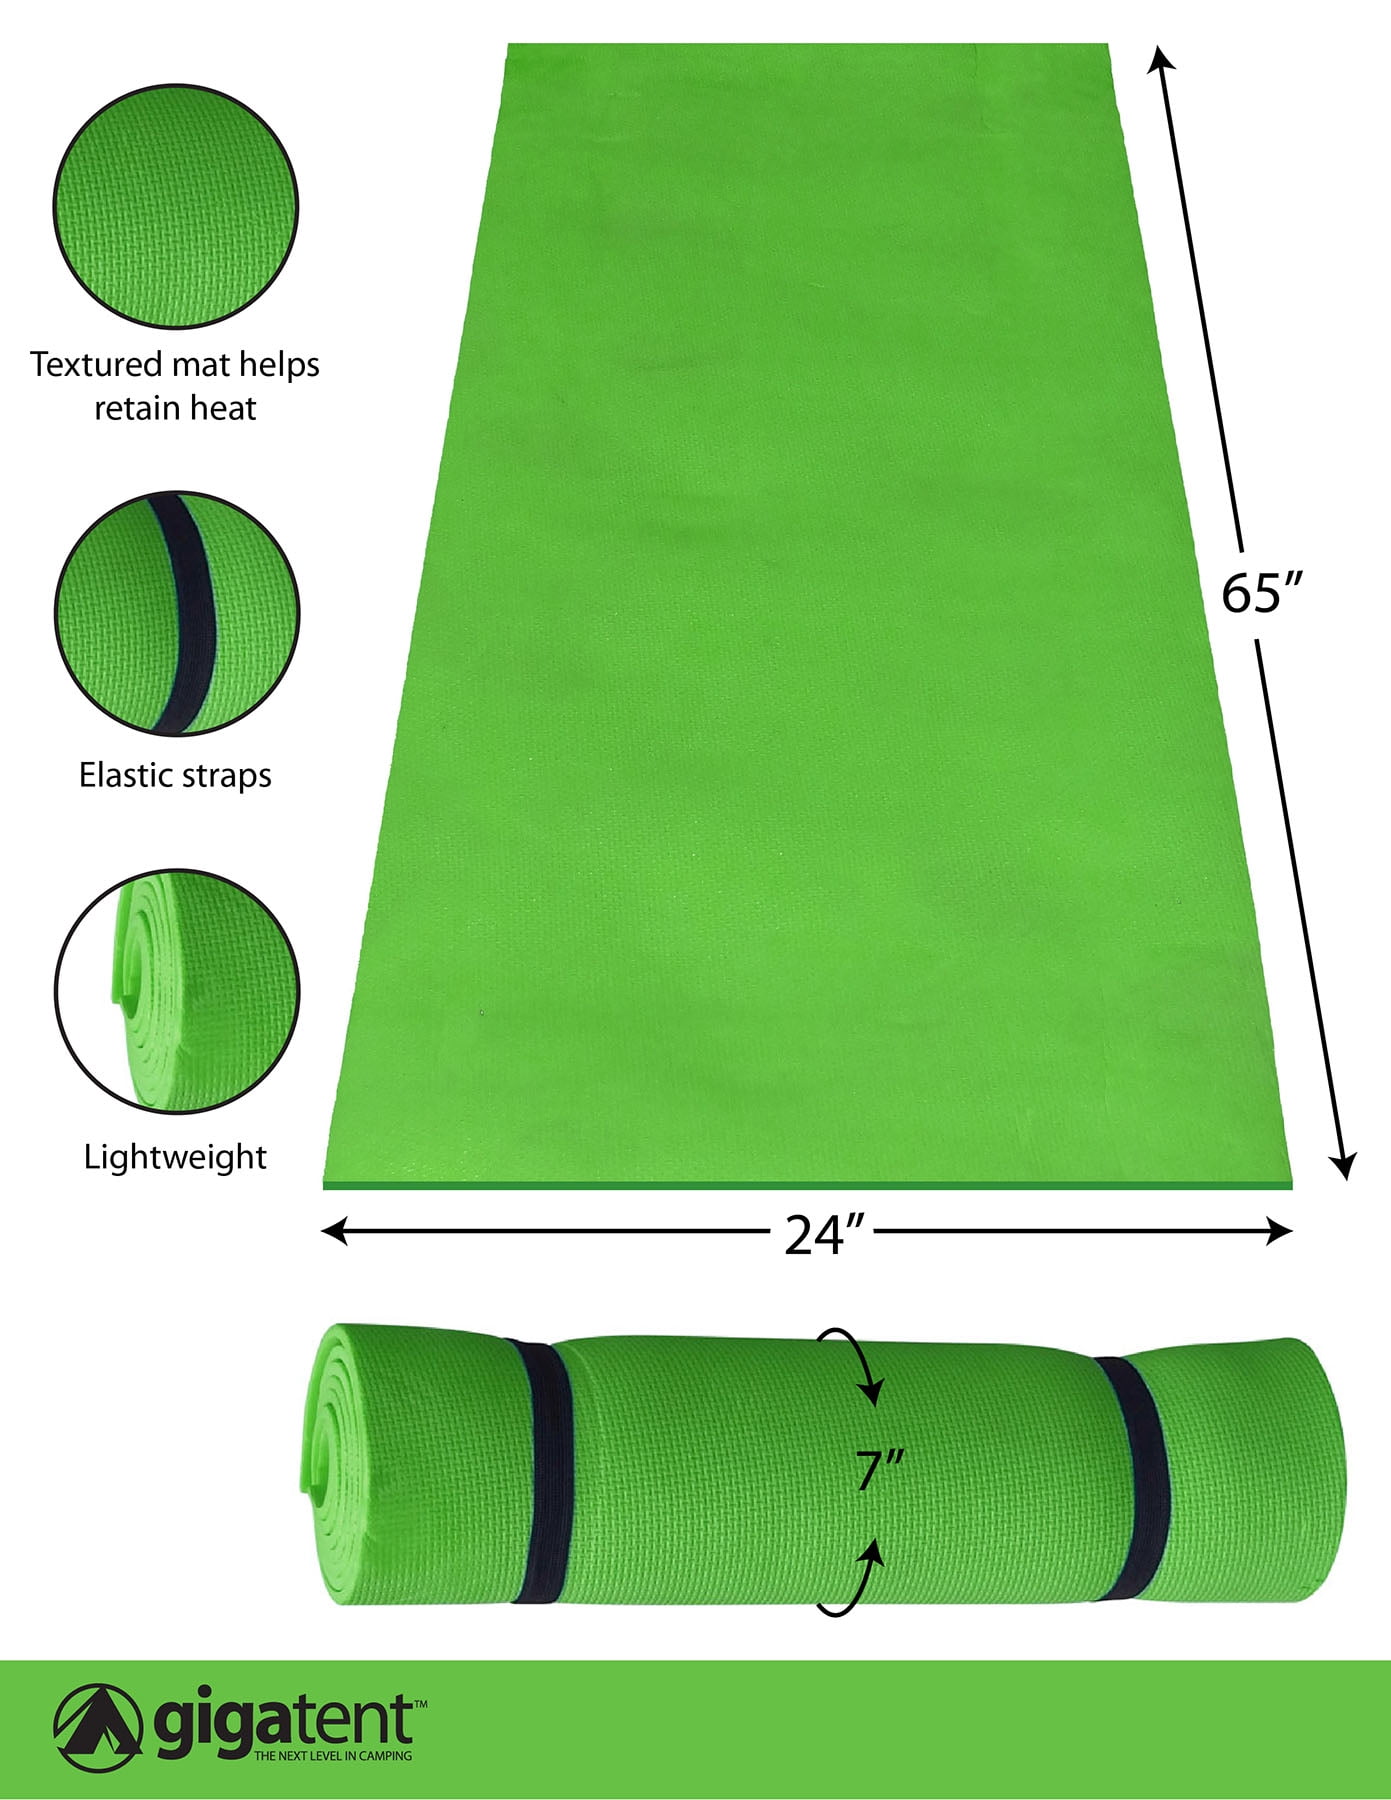 GigaTent Ultralight Foam Outdoor Camping Yoga Mat for Travelling